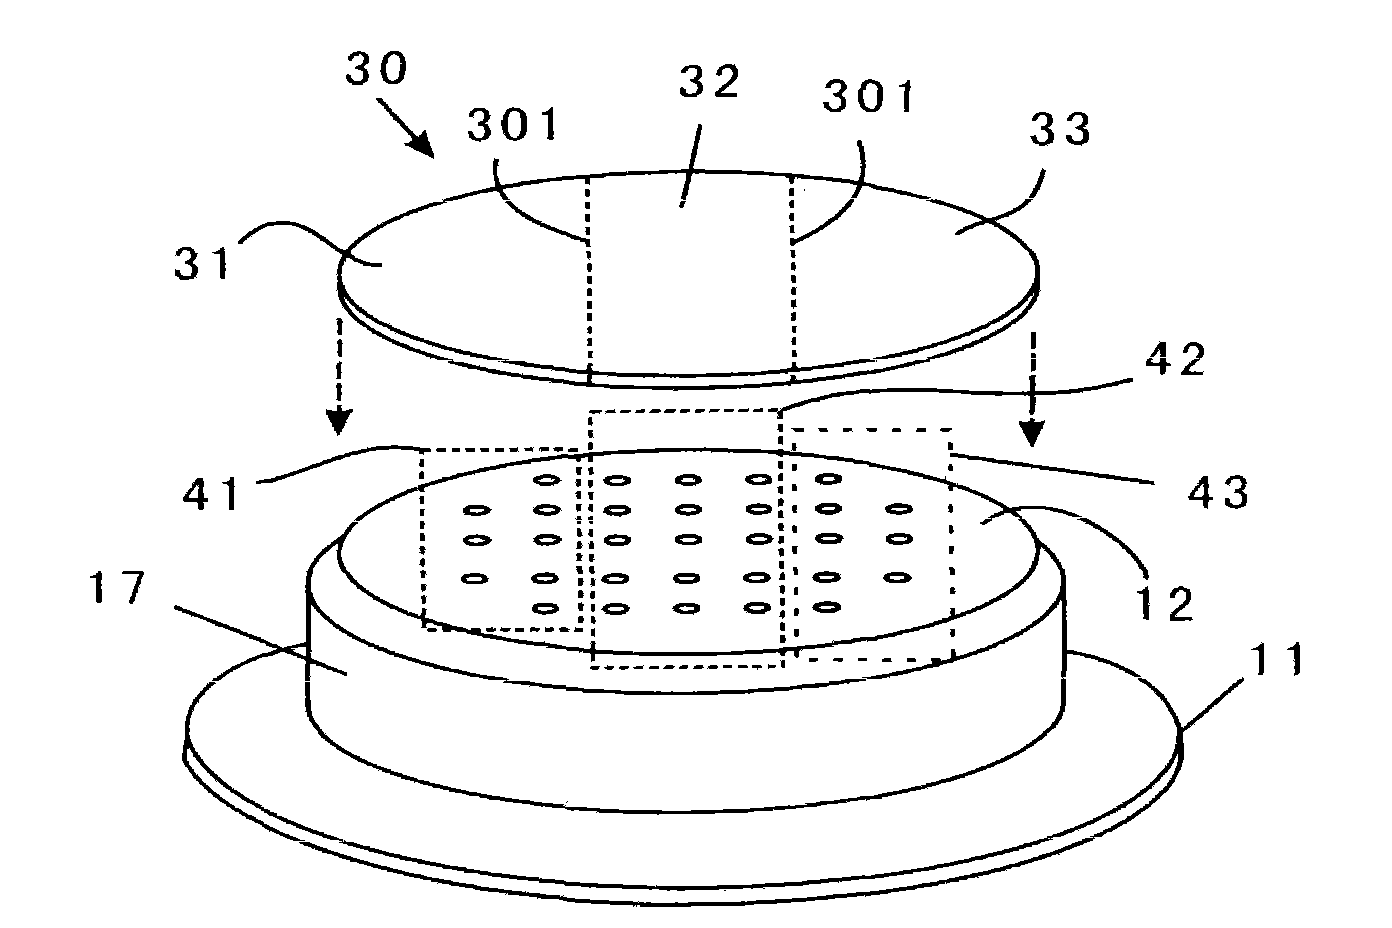 Self-heating pressing moxibustion and processing method